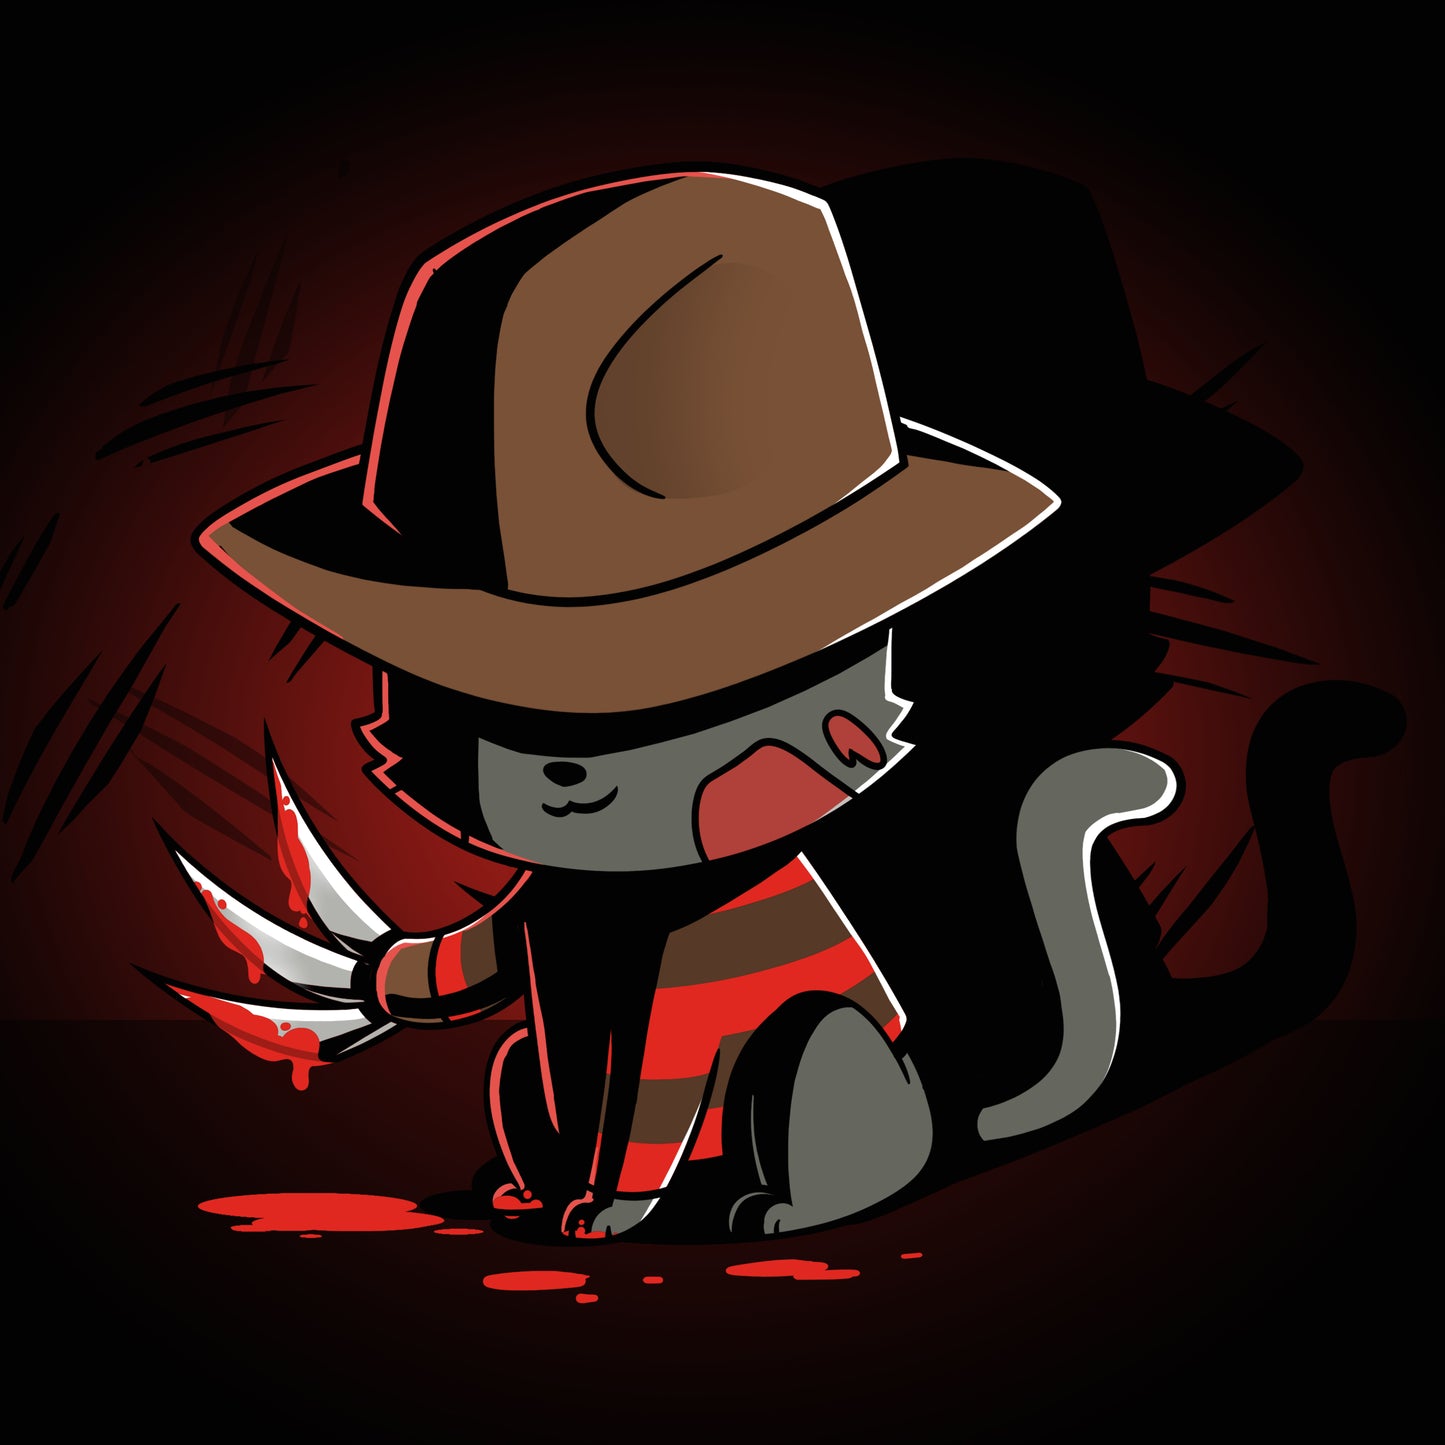 A TeeTurtle Nightmare Cat wearing a hat and holding a knife on a black t-shirt.